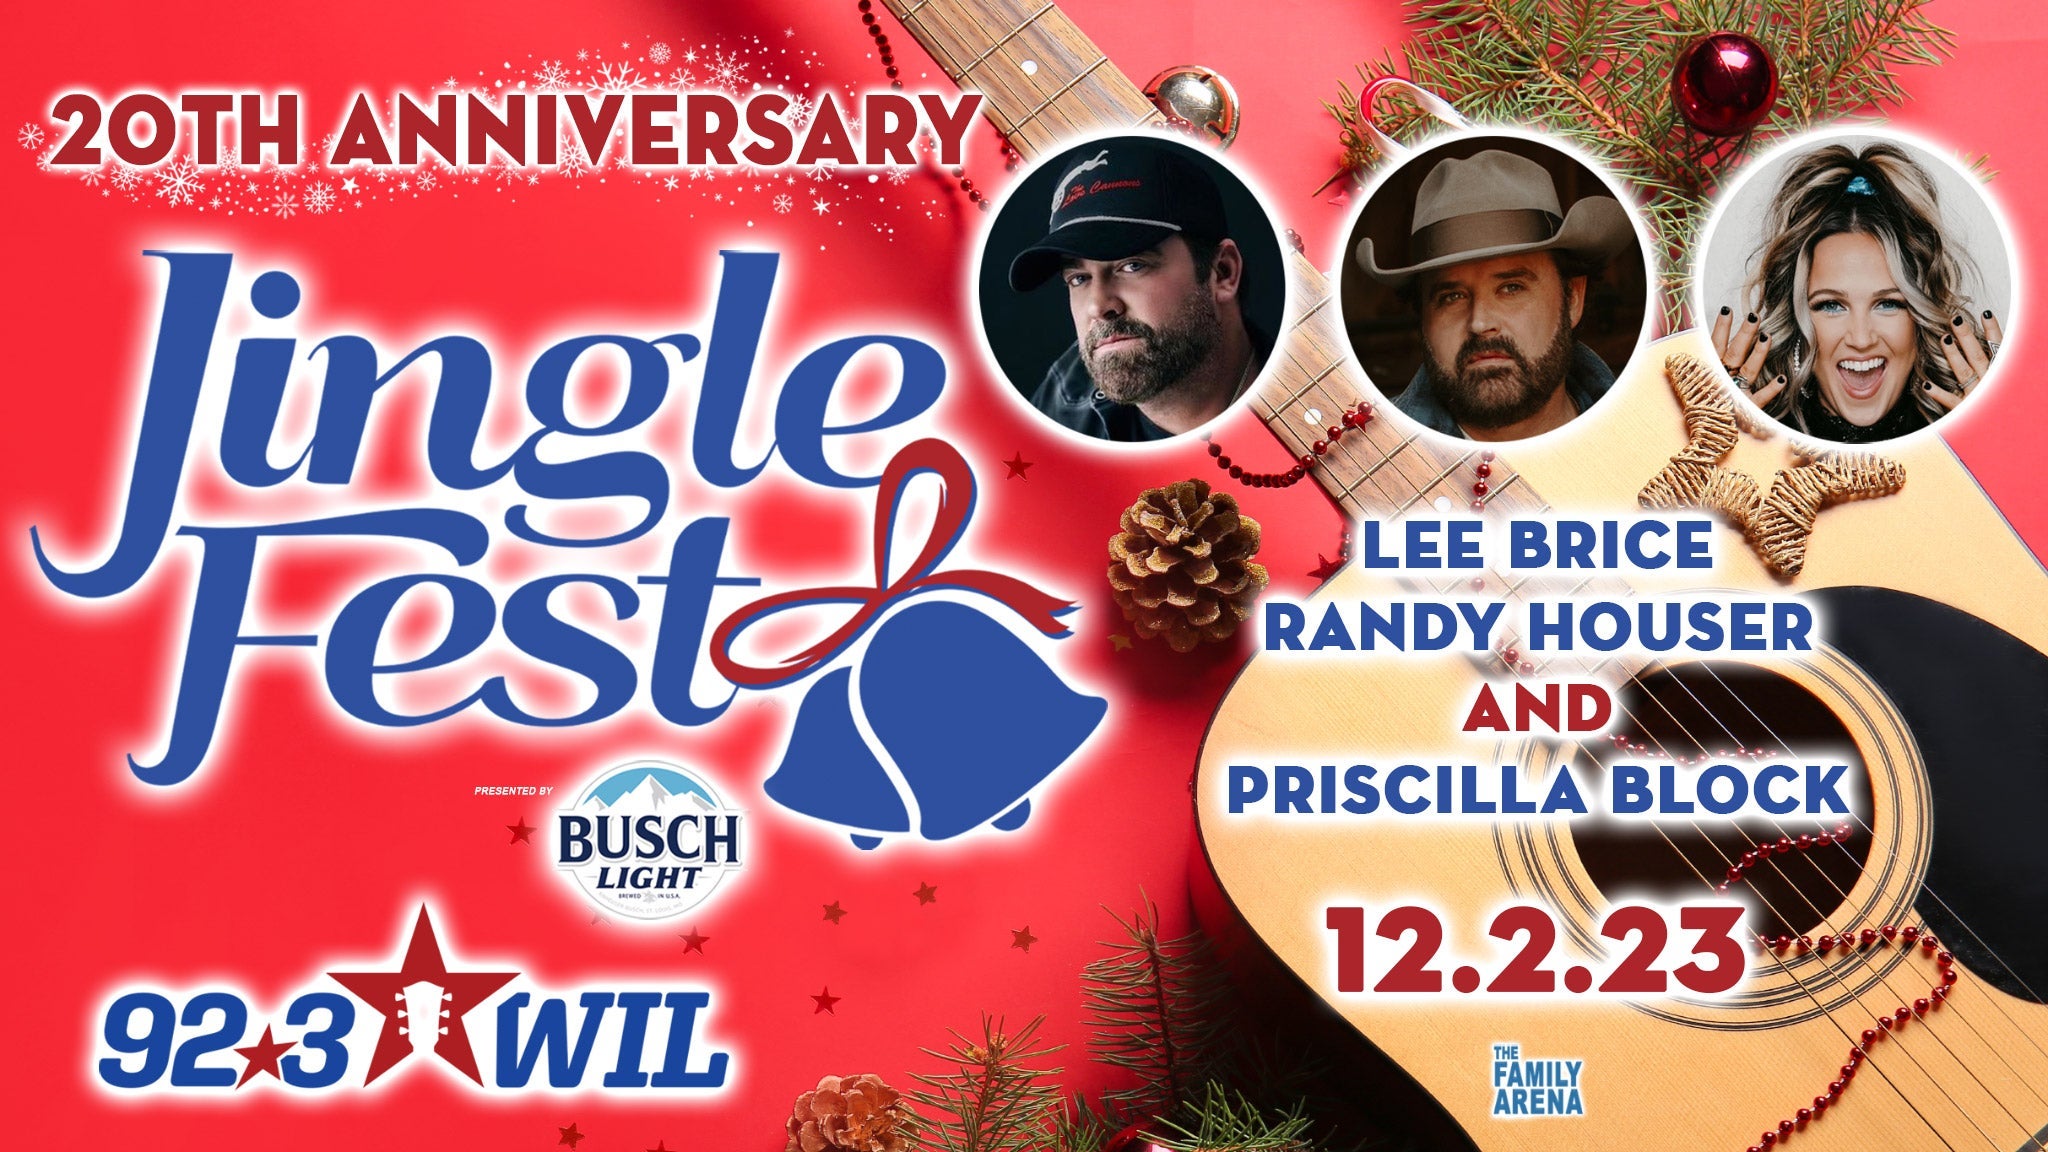 working presale code for JingleFest 2023 - 20th Anniversary advanced tickets in Saint Charles at Family Arena